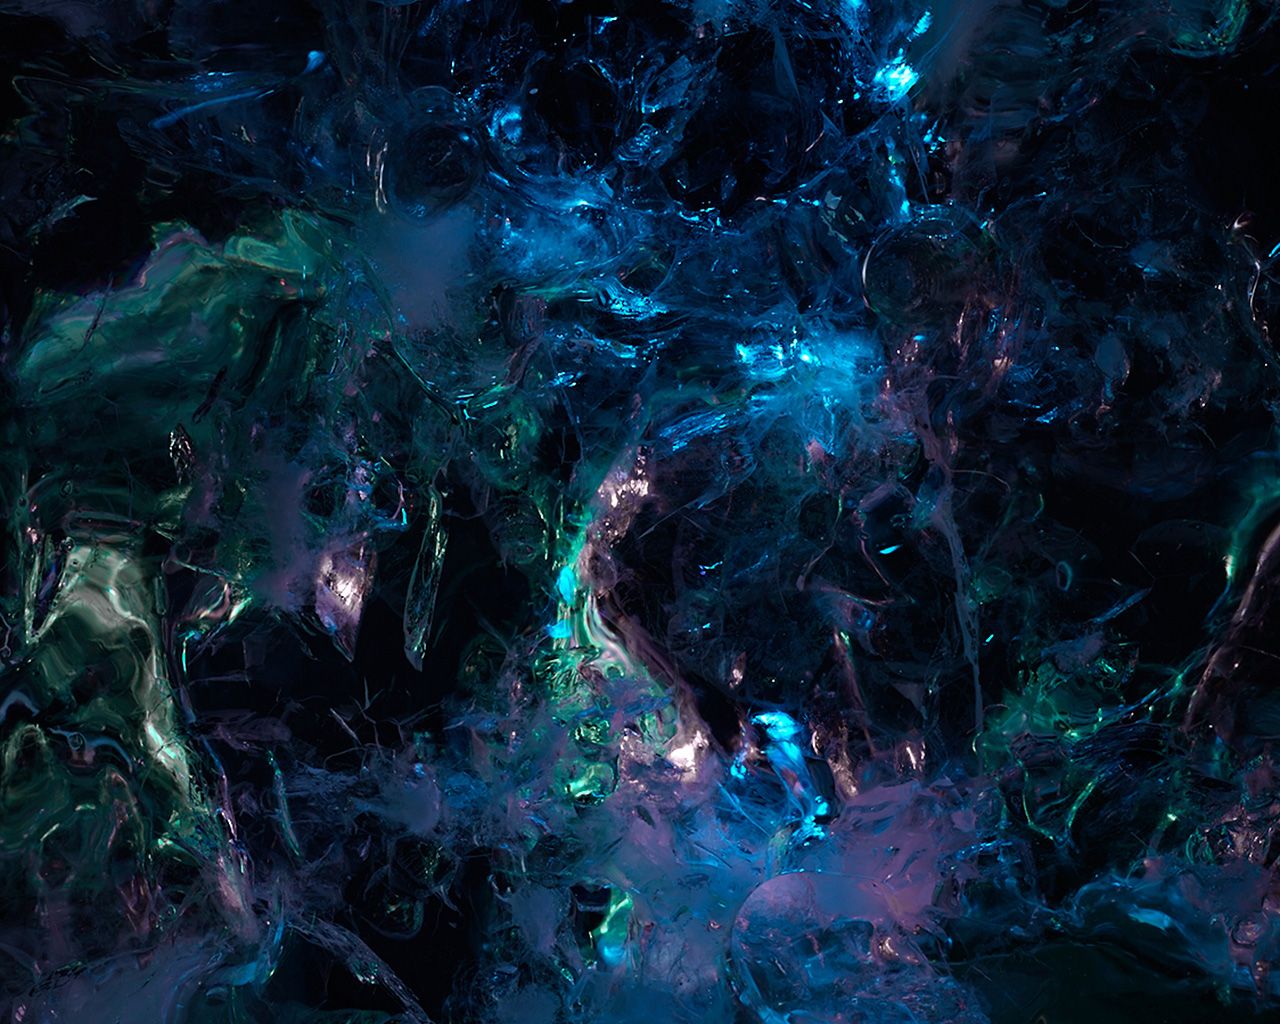 A close-up of a black, blue and green abstract painting - Grunge